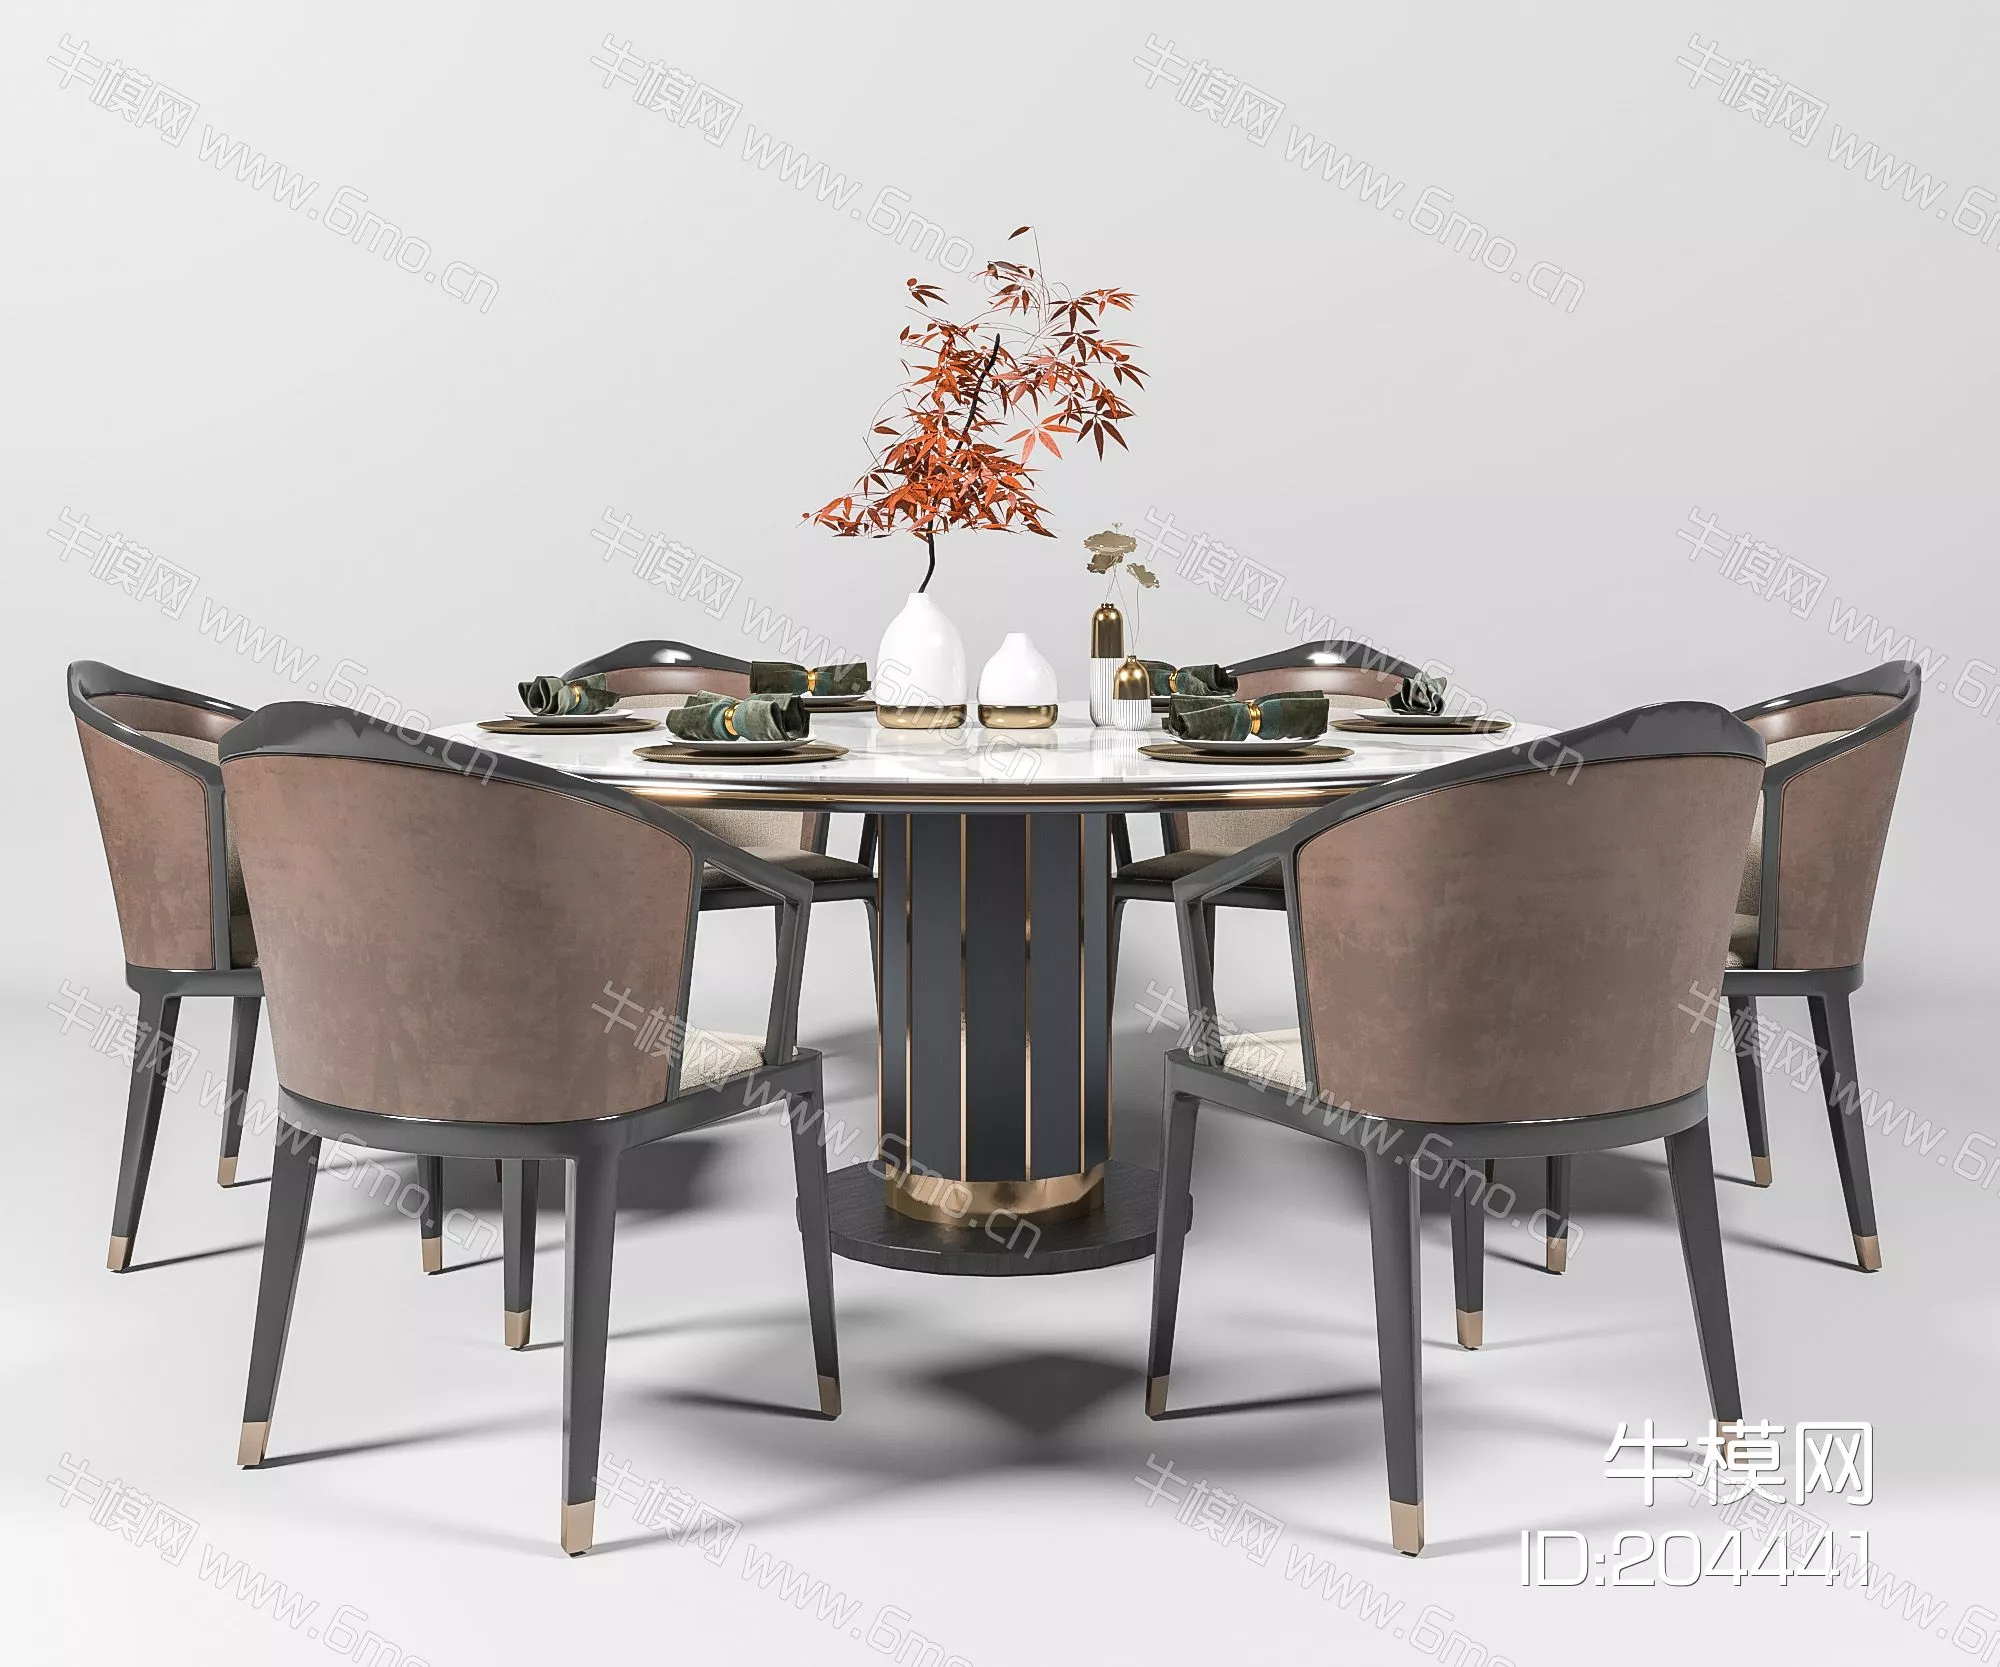 CHINESE DINING TABLE SET - SKETCHUP 3D MODEL - ENSCAPE - 204441